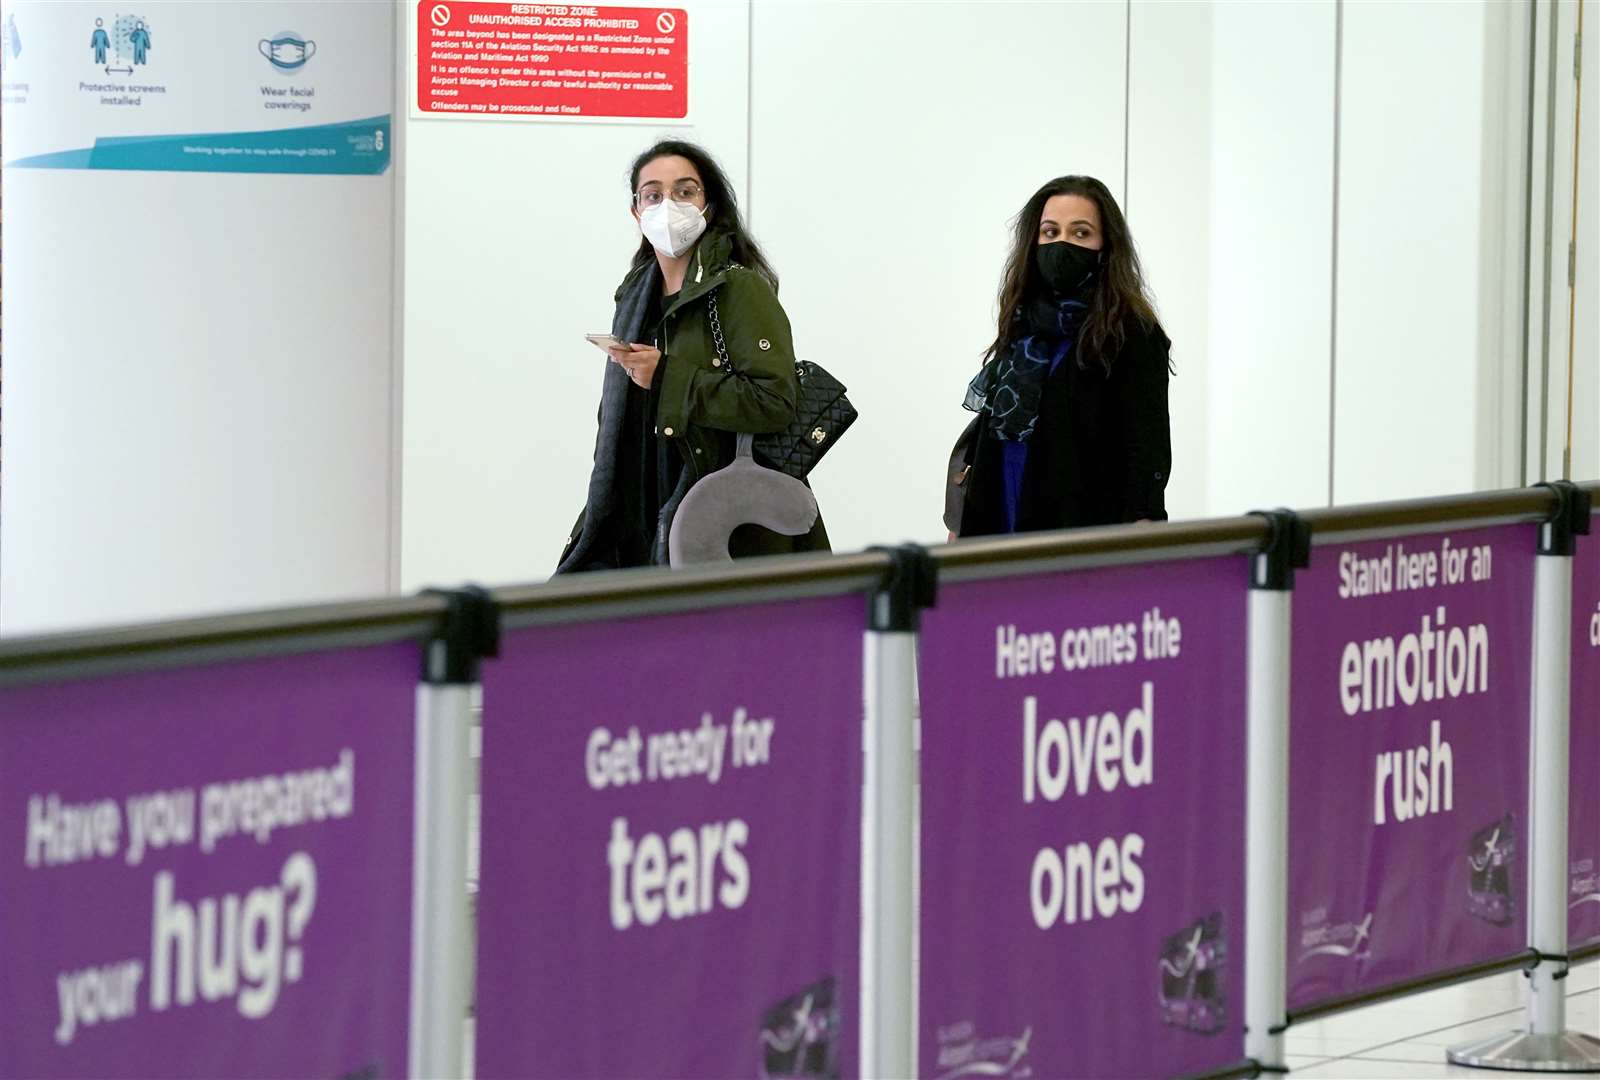 Passengers in the arrivals hall after arriving on a flight from Amsterdam at Glasgow Airport (Andrew Milligan/PA)